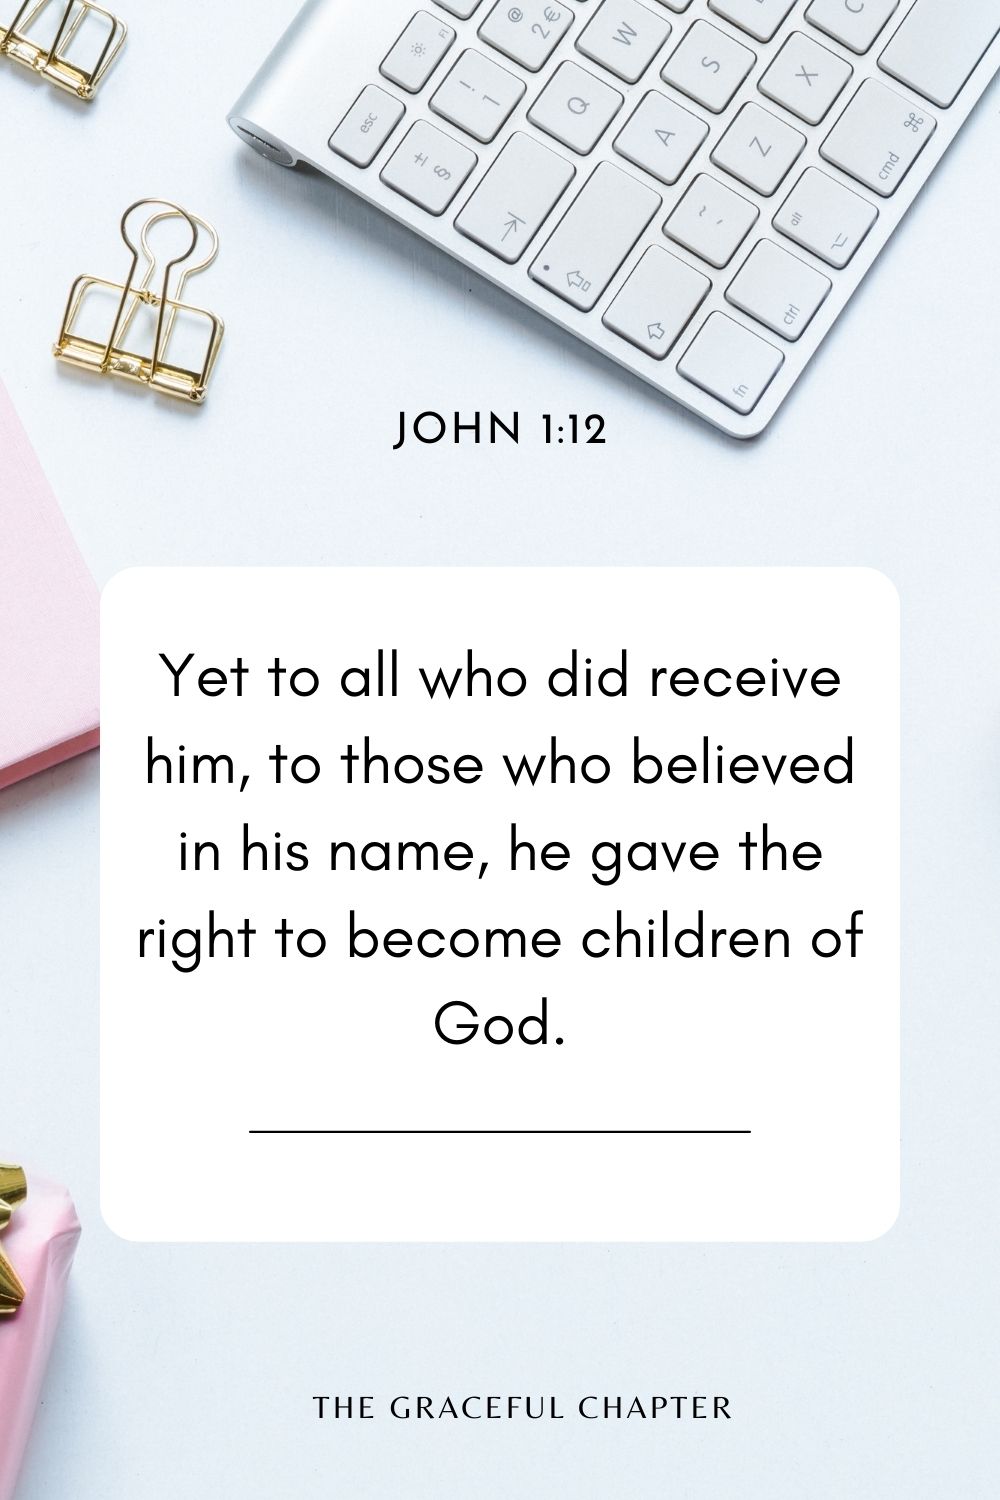 Yet to all who did receive him, to those who believed in his name, he gave the right to become children of God. John 1:12